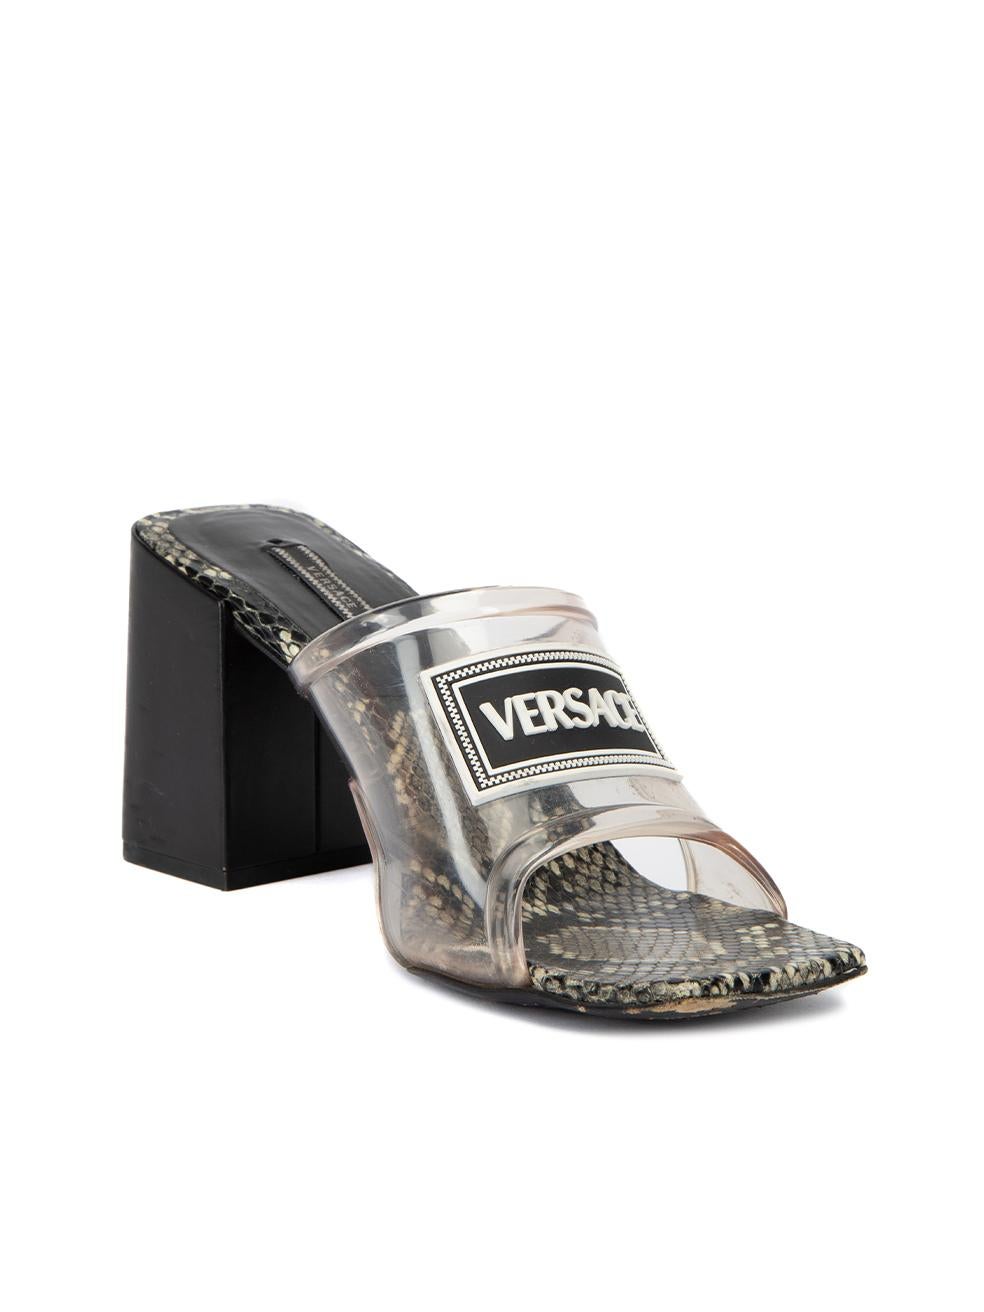 CONDITION is Good. Minor wear to mules is evident. Light wear to perspex foot strap and leather heel block which is scuffed. There is also visible wear to the outsole on this used Versace designer resale item. Details SS 2019 Runway Look #10 Grey